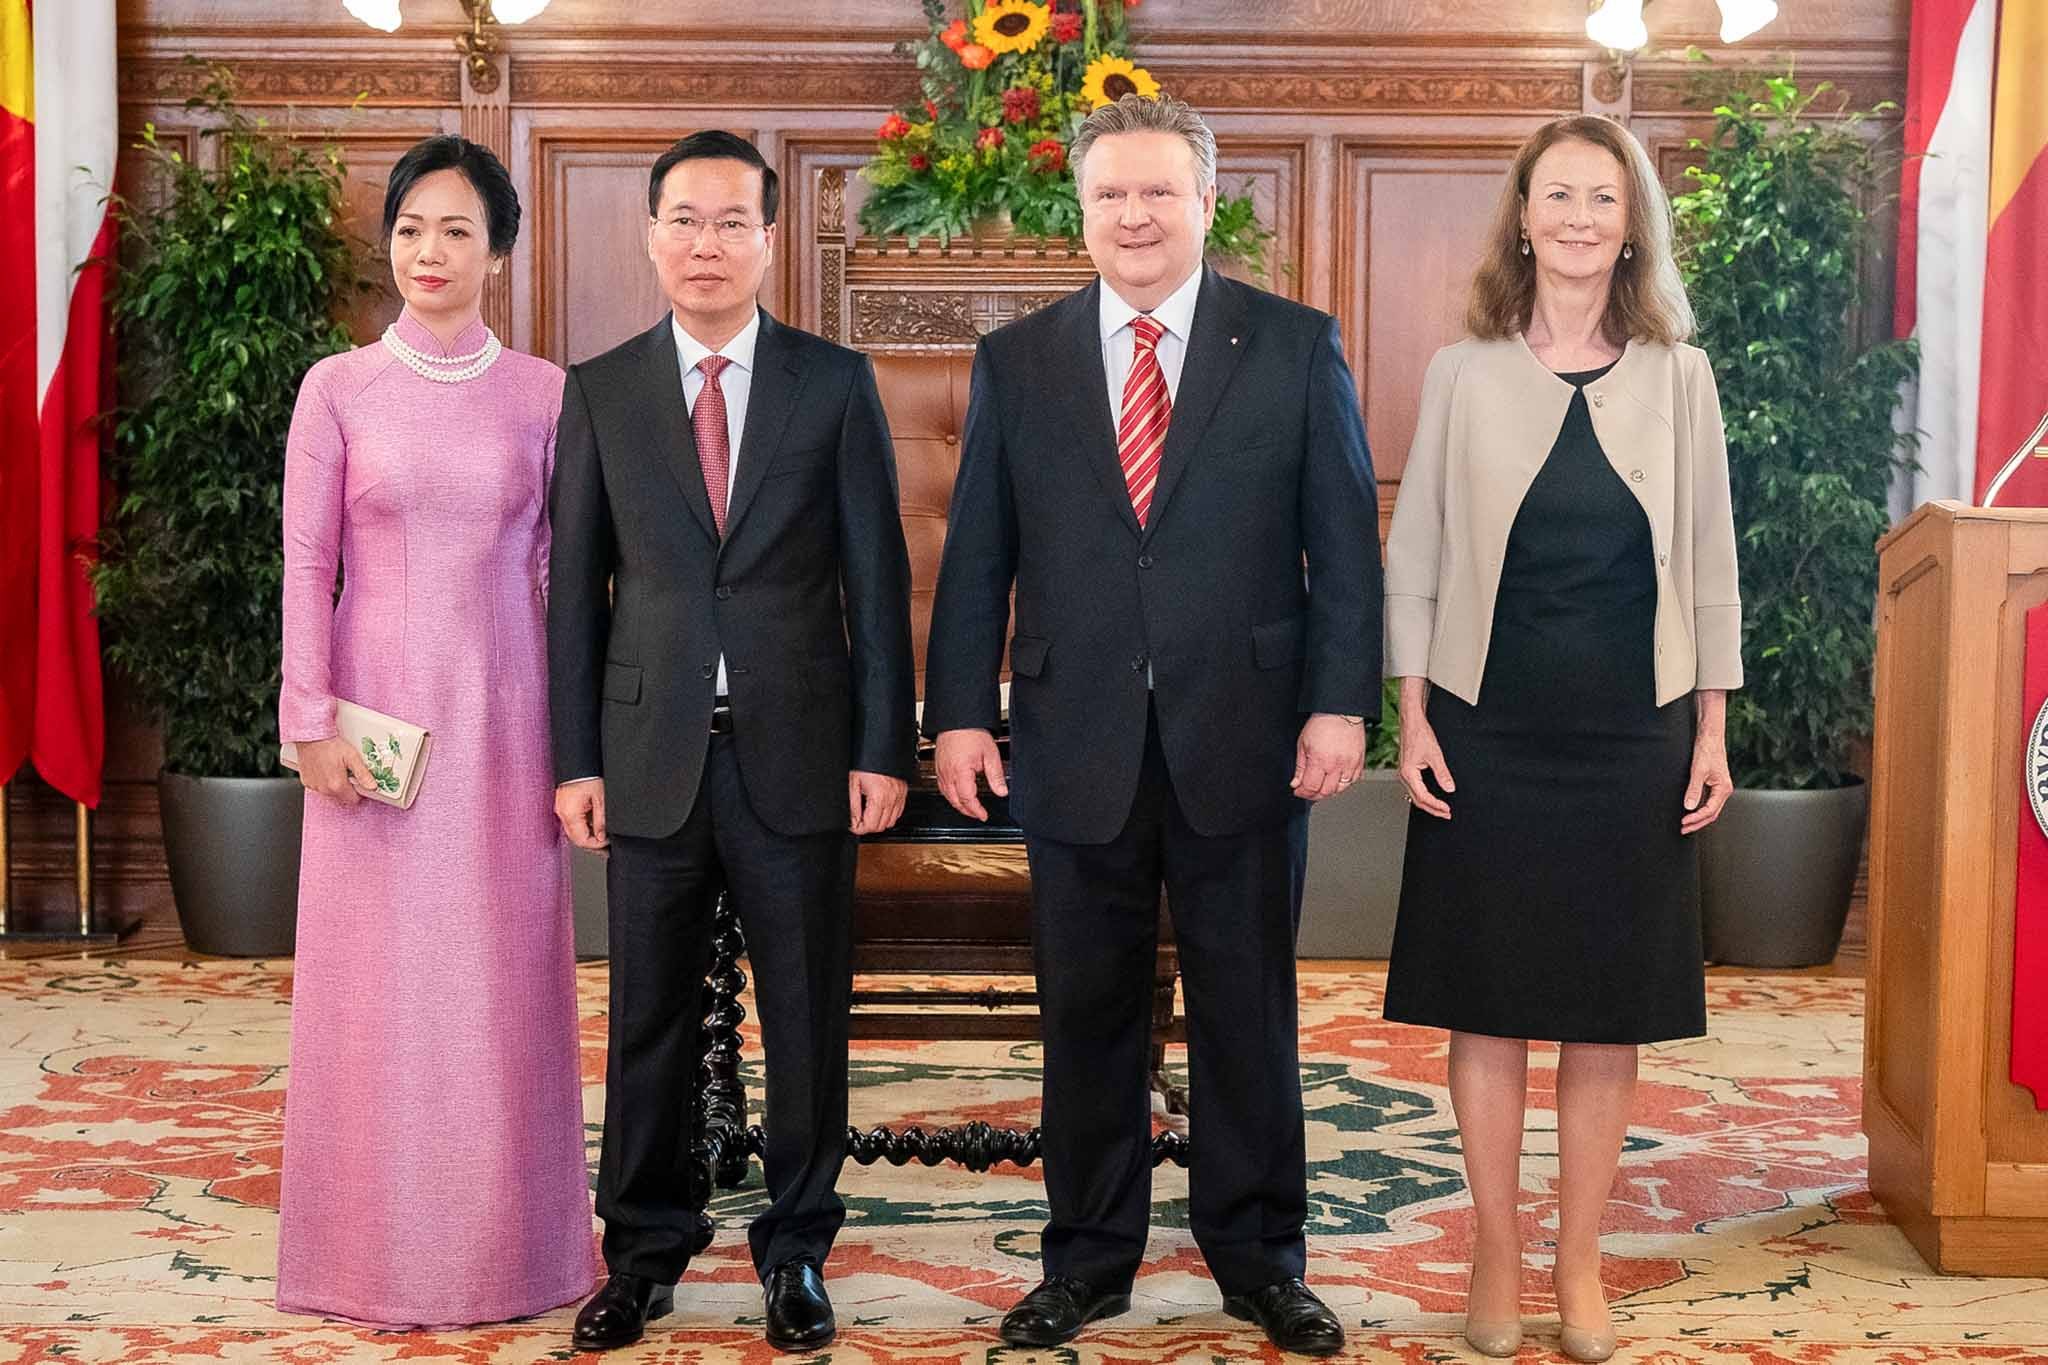 President Vo Van Thuong’s visits to Austria, Italy, Vatican successful: Foreign Minister